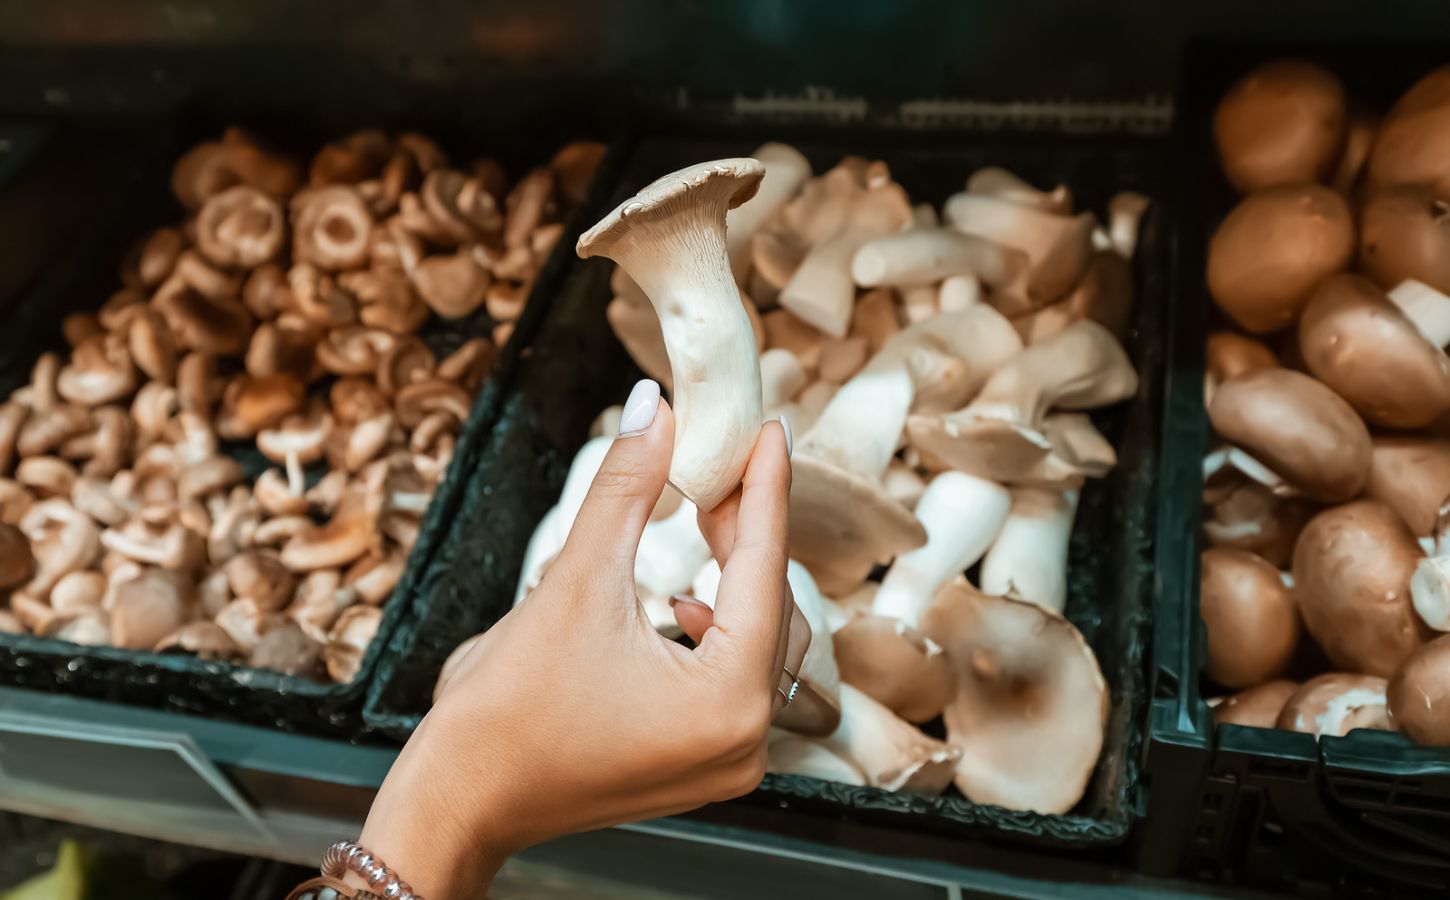 A person in a grocery store holds a king oyster mushroom, which have been growingly popular